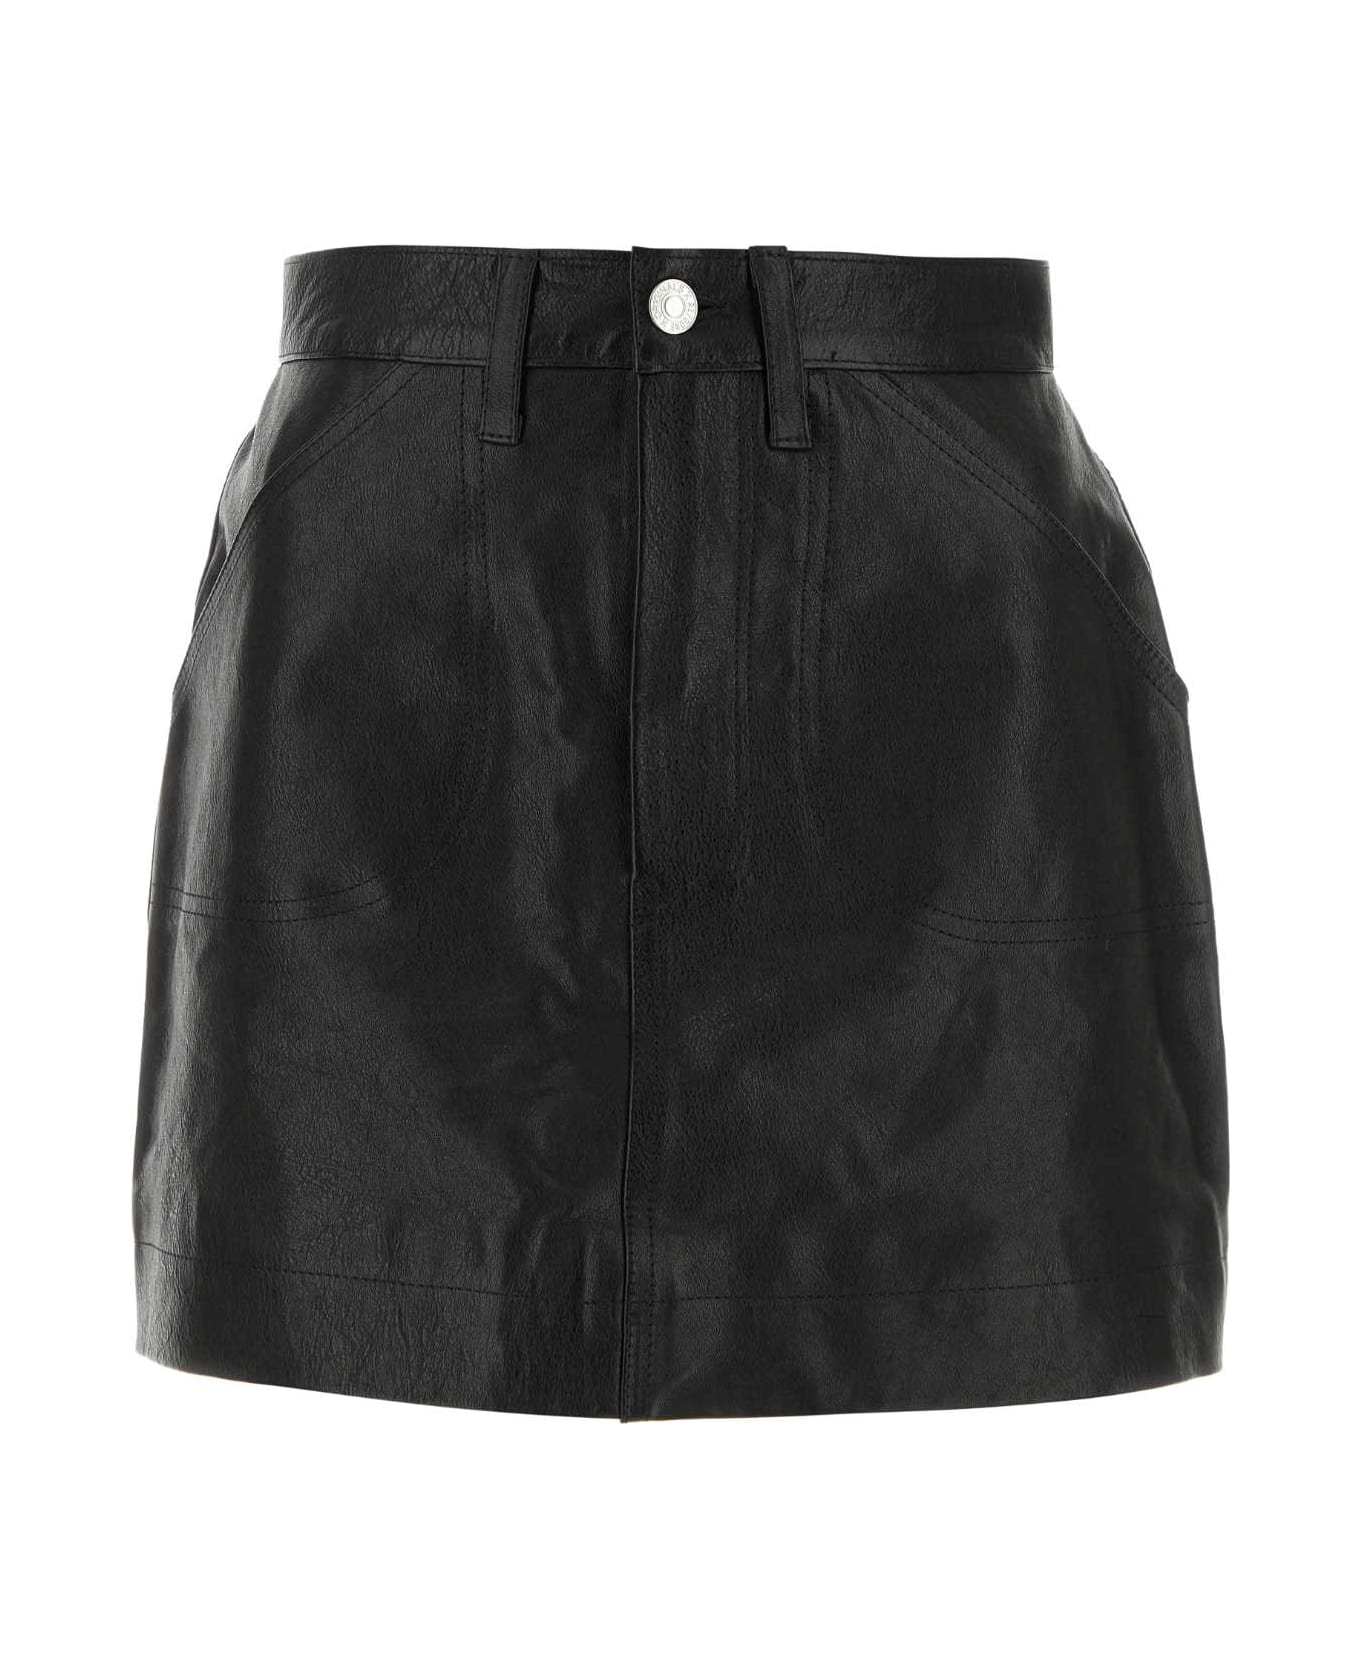 RE/DONE Black Leather Mini Skirt - BLACKLEATHER